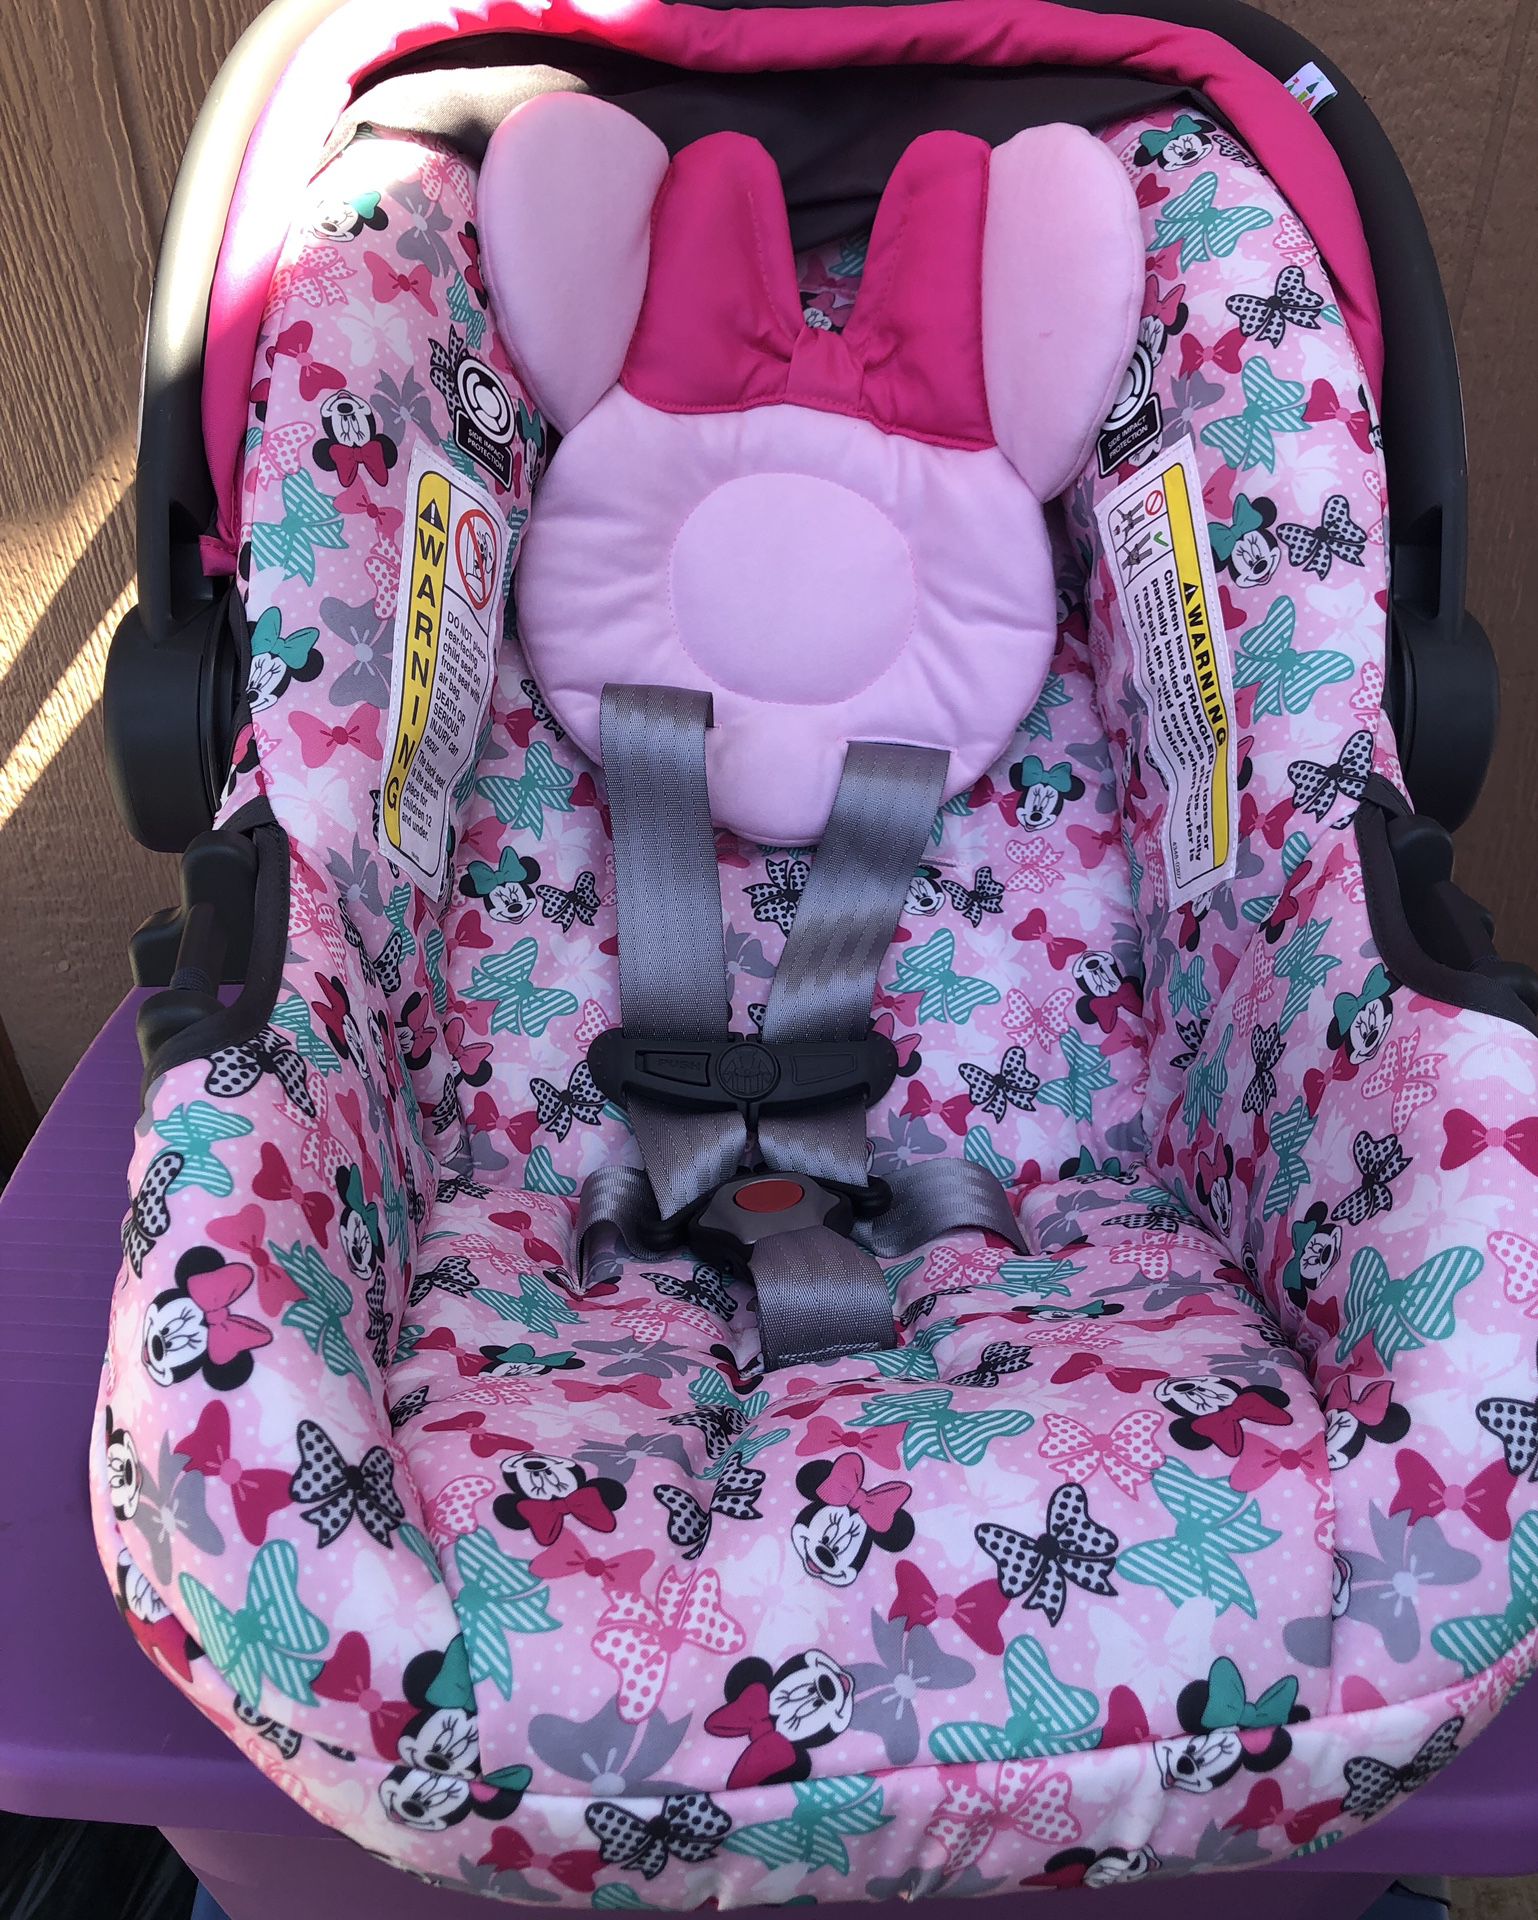 New Minnie Mouse car seat